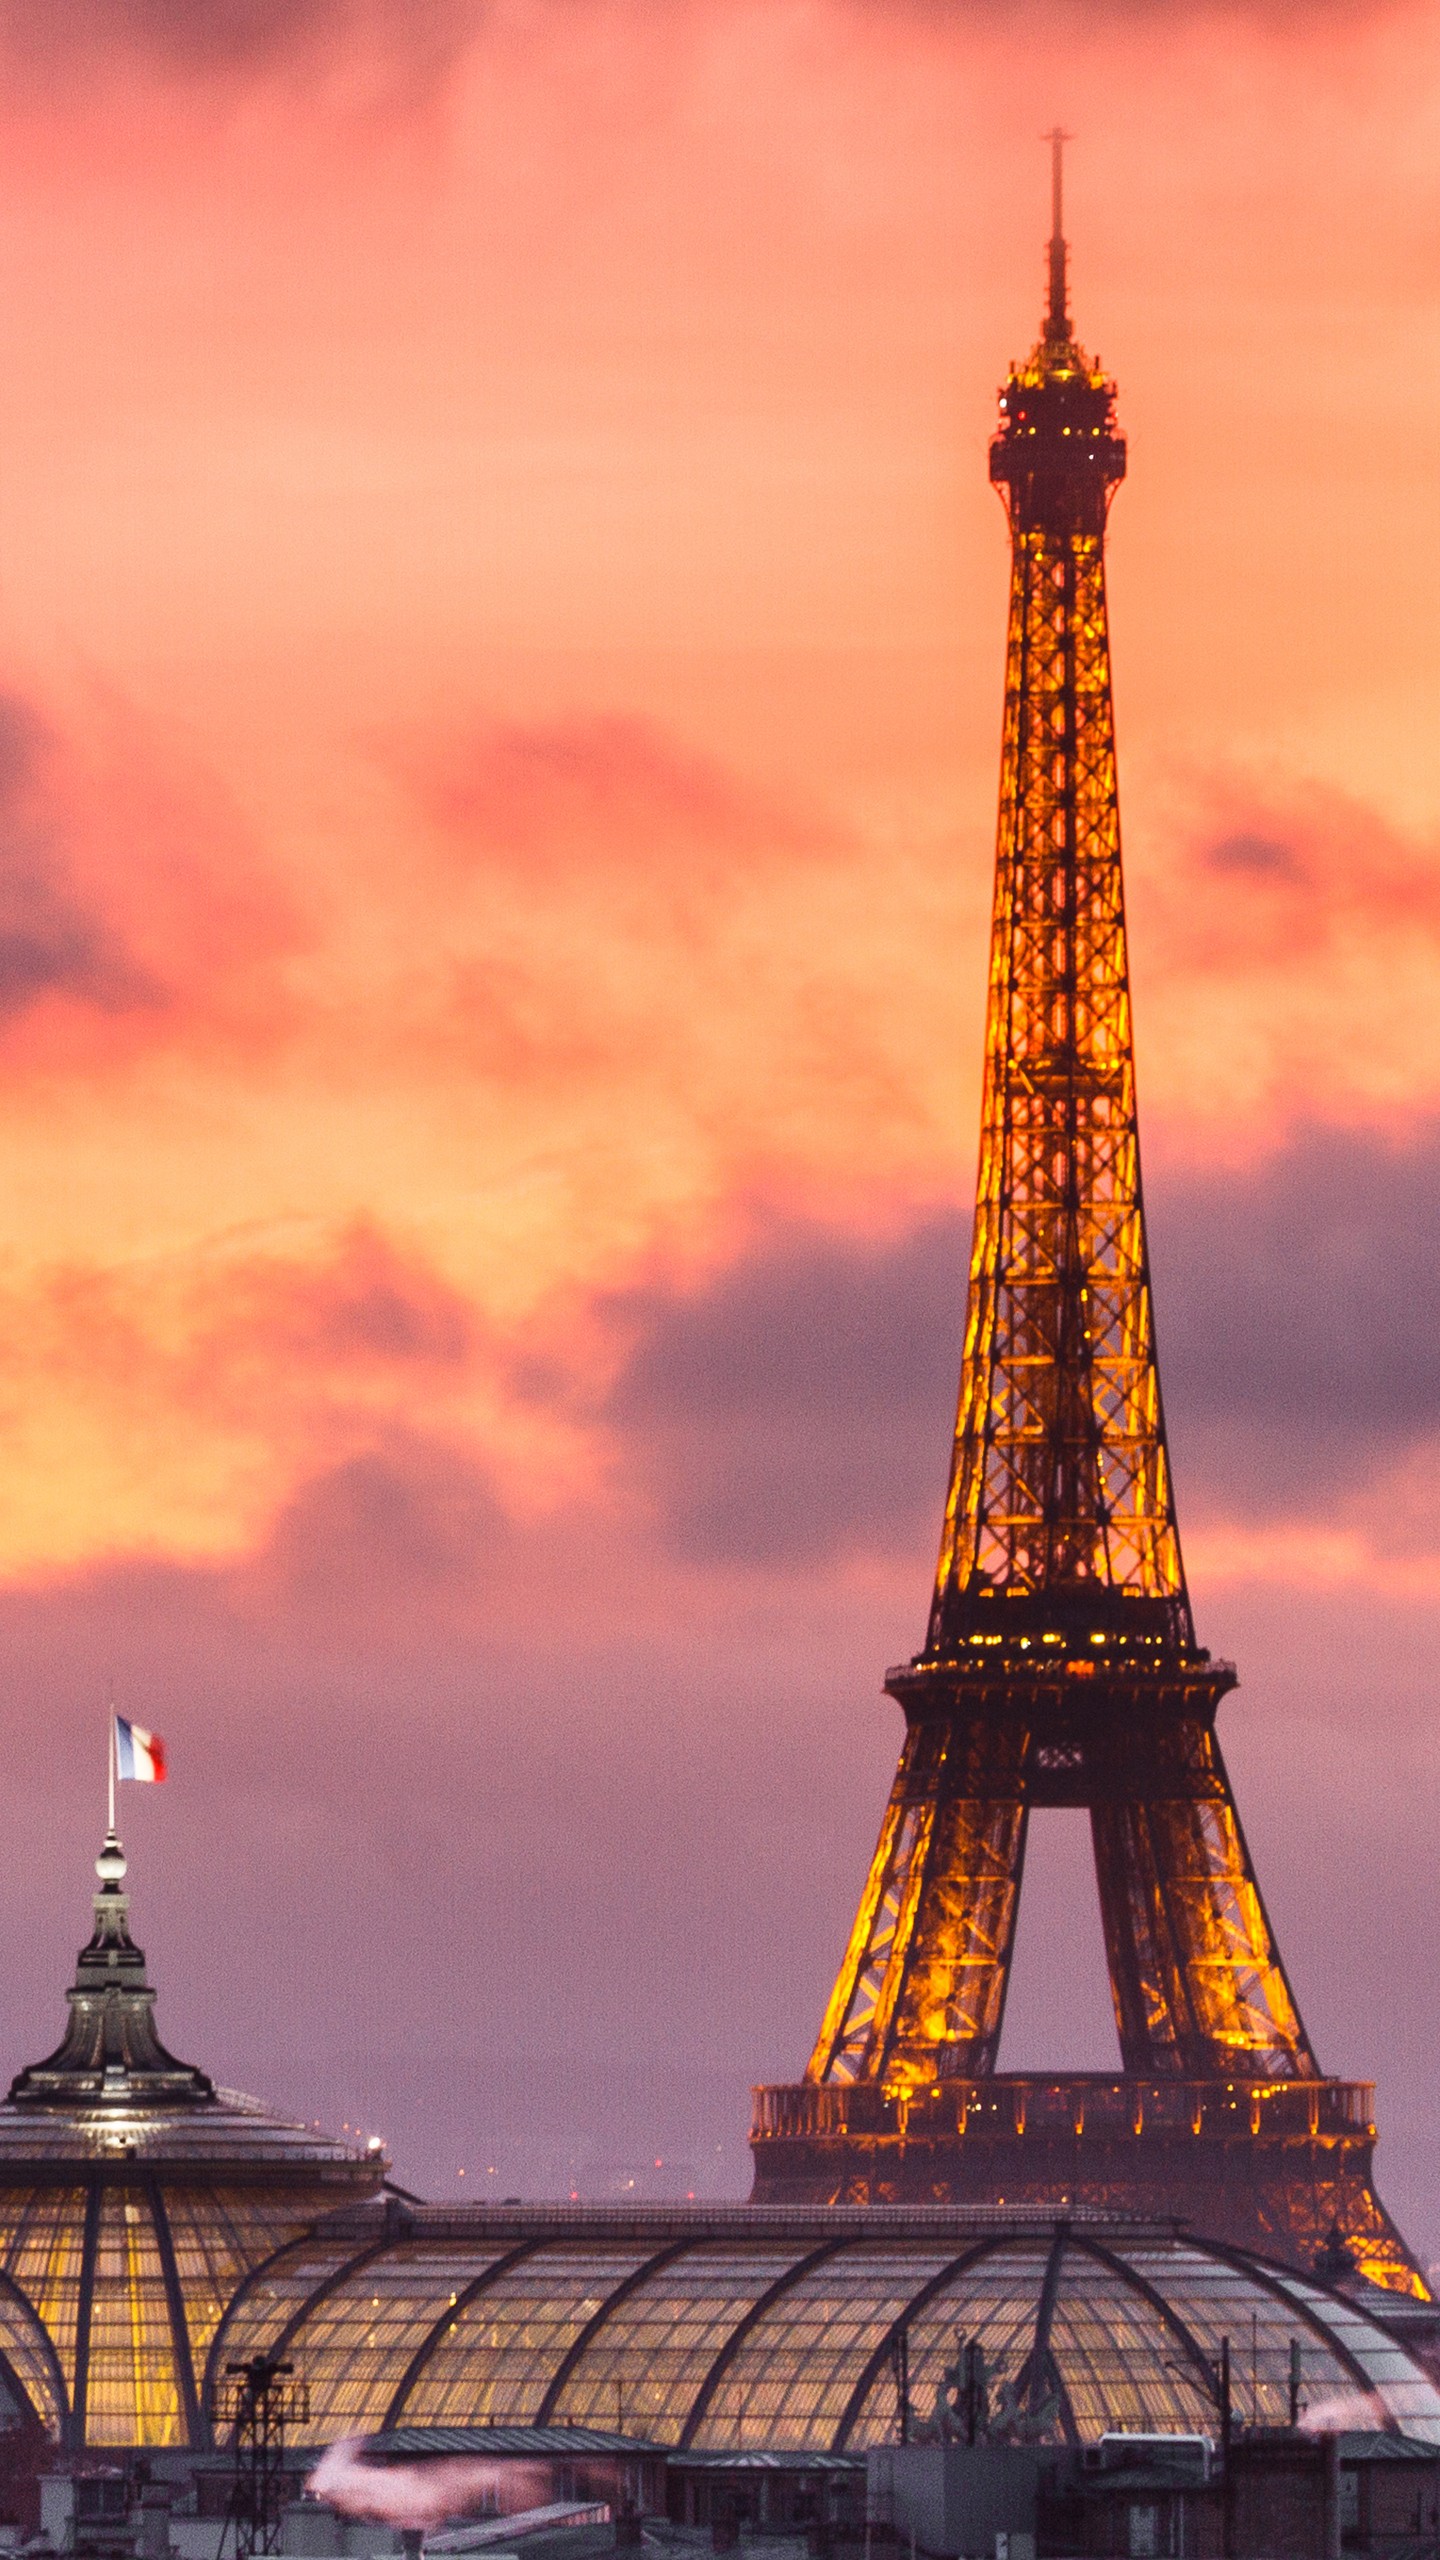 Paris Eiffel Tower With Purple Sky And Clouds Background During Sunset 4K 5K HD Travel Wallpaper